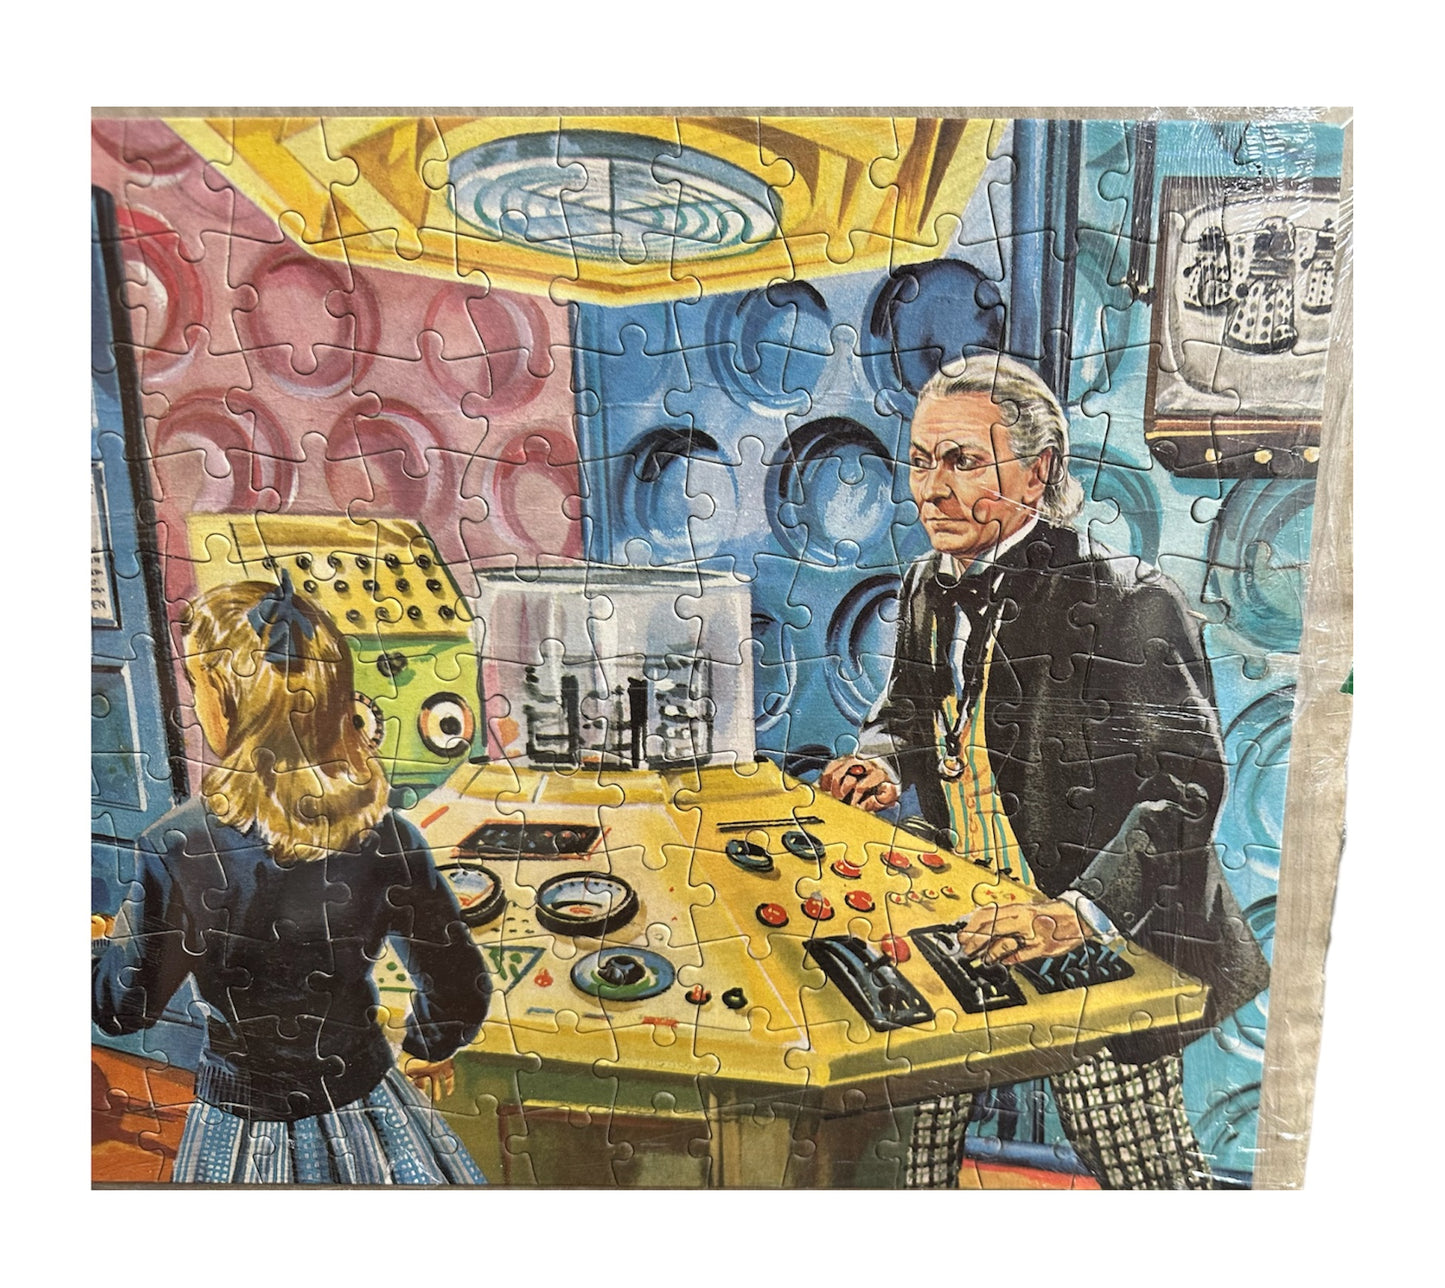 Vintage 1965 Dr Doctor Who And The Daleks Jigsaw Puzzle - Inside The Tardis - Complete & Assembled On A Board